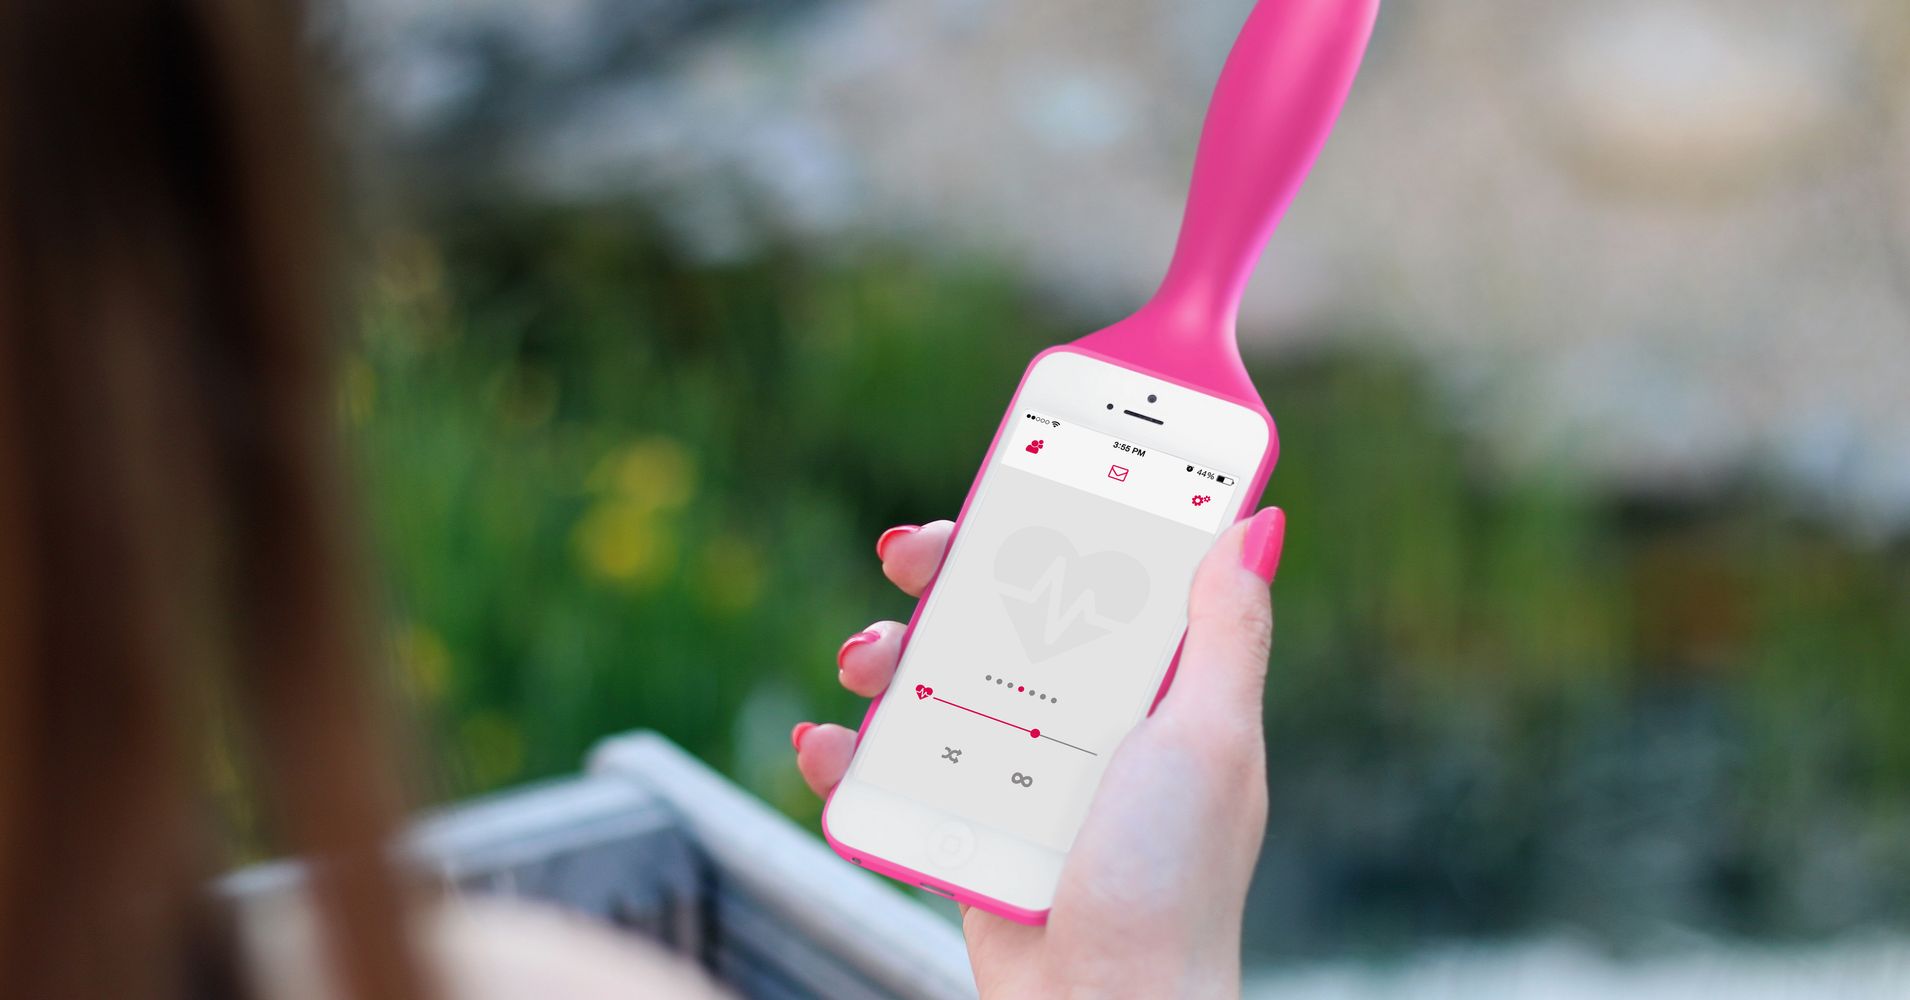 Toy Transforms Your Phone Into A Vibrator Makes Sexting Too Real 8538